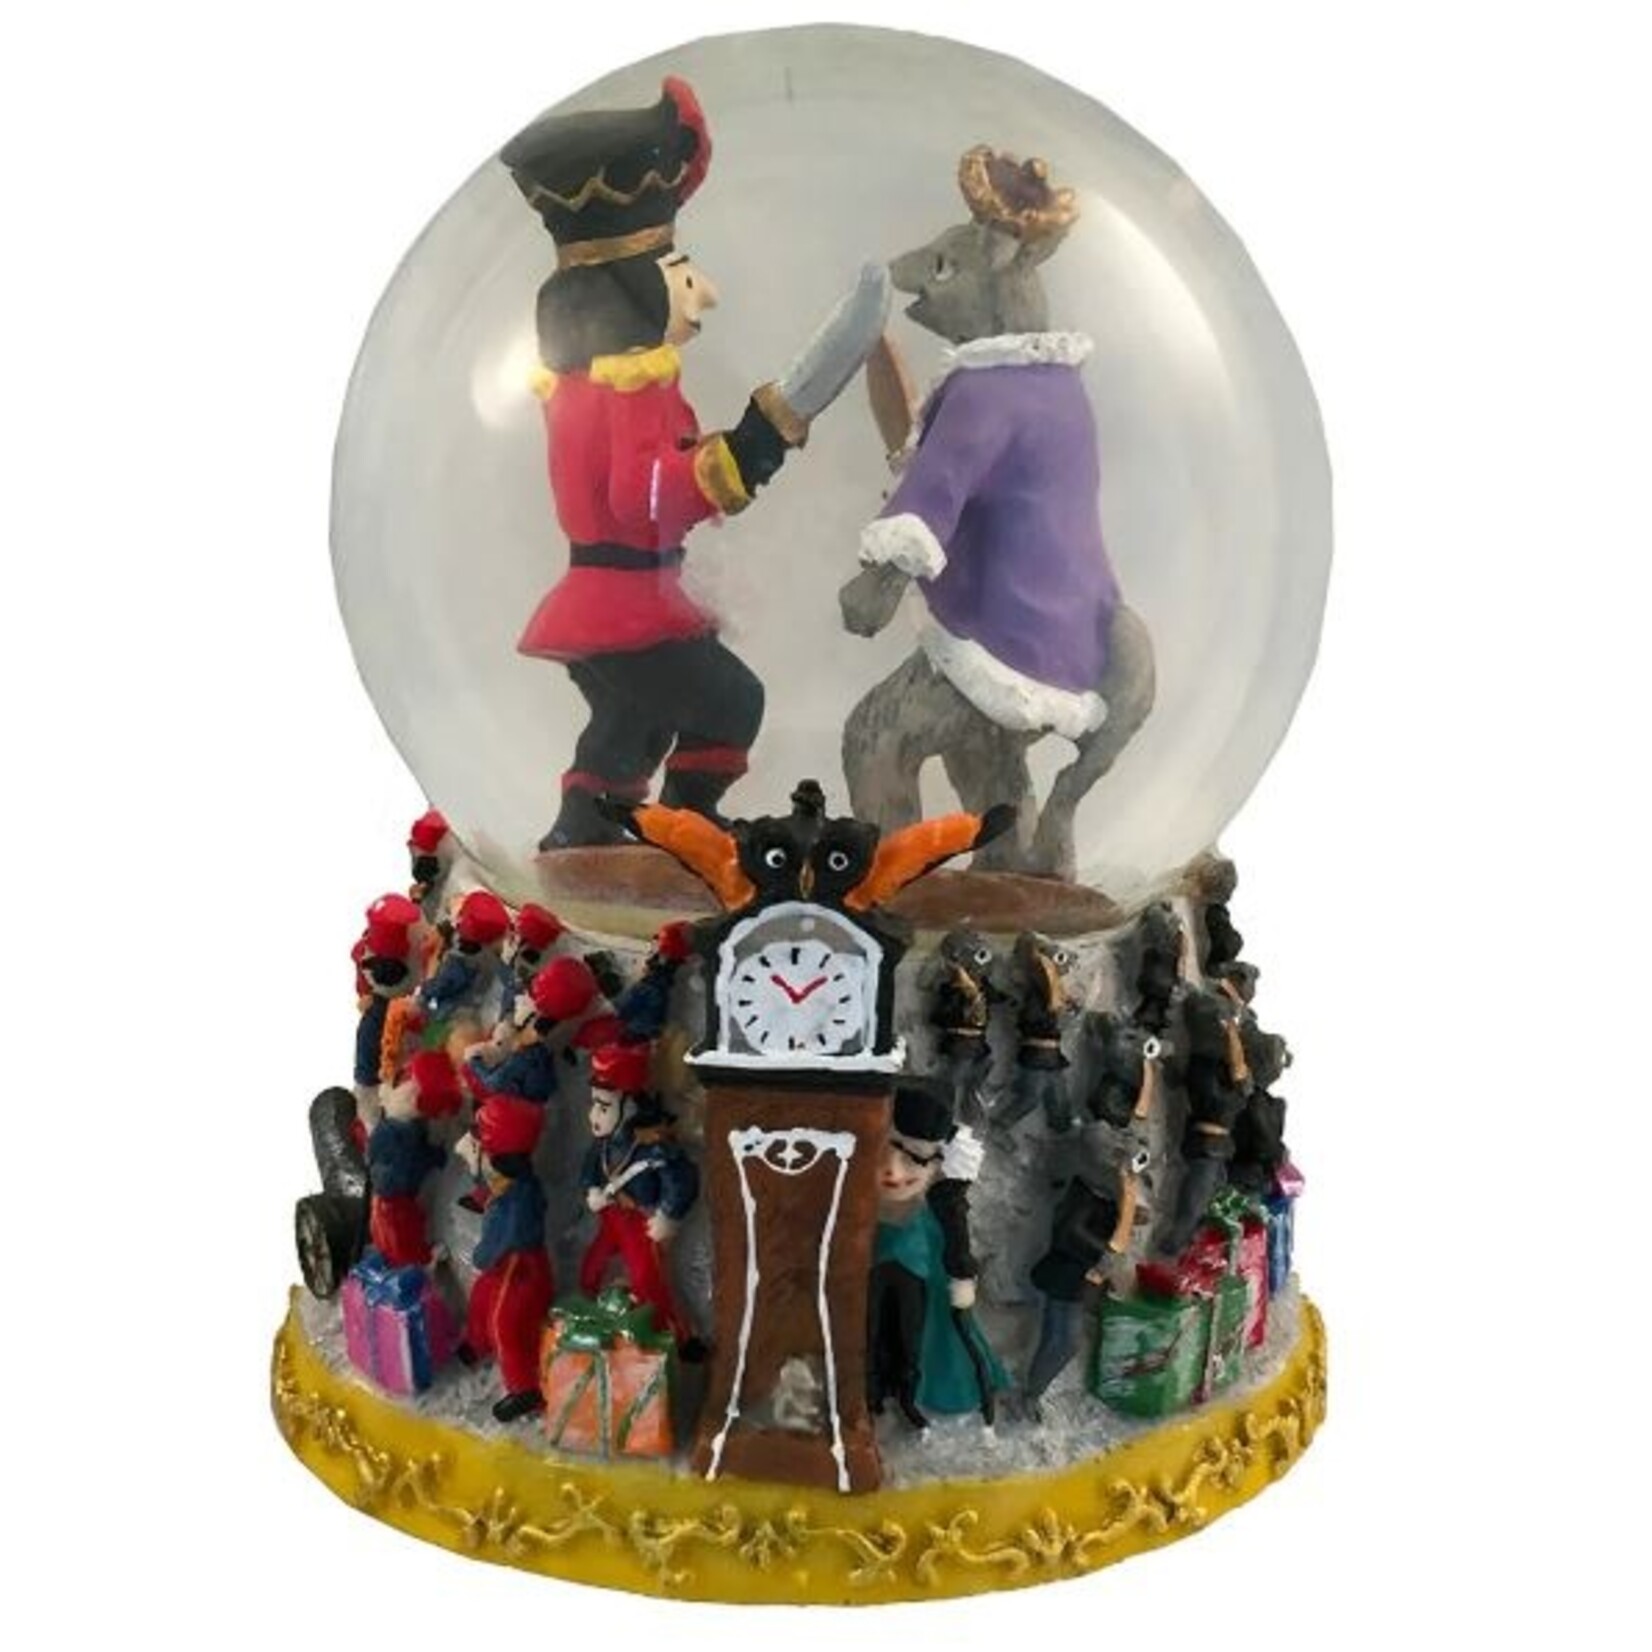 Nutcracker Ballet Gifts Musical Fight Scene Snow Globe Plays Suite March SG-FSMWG-001